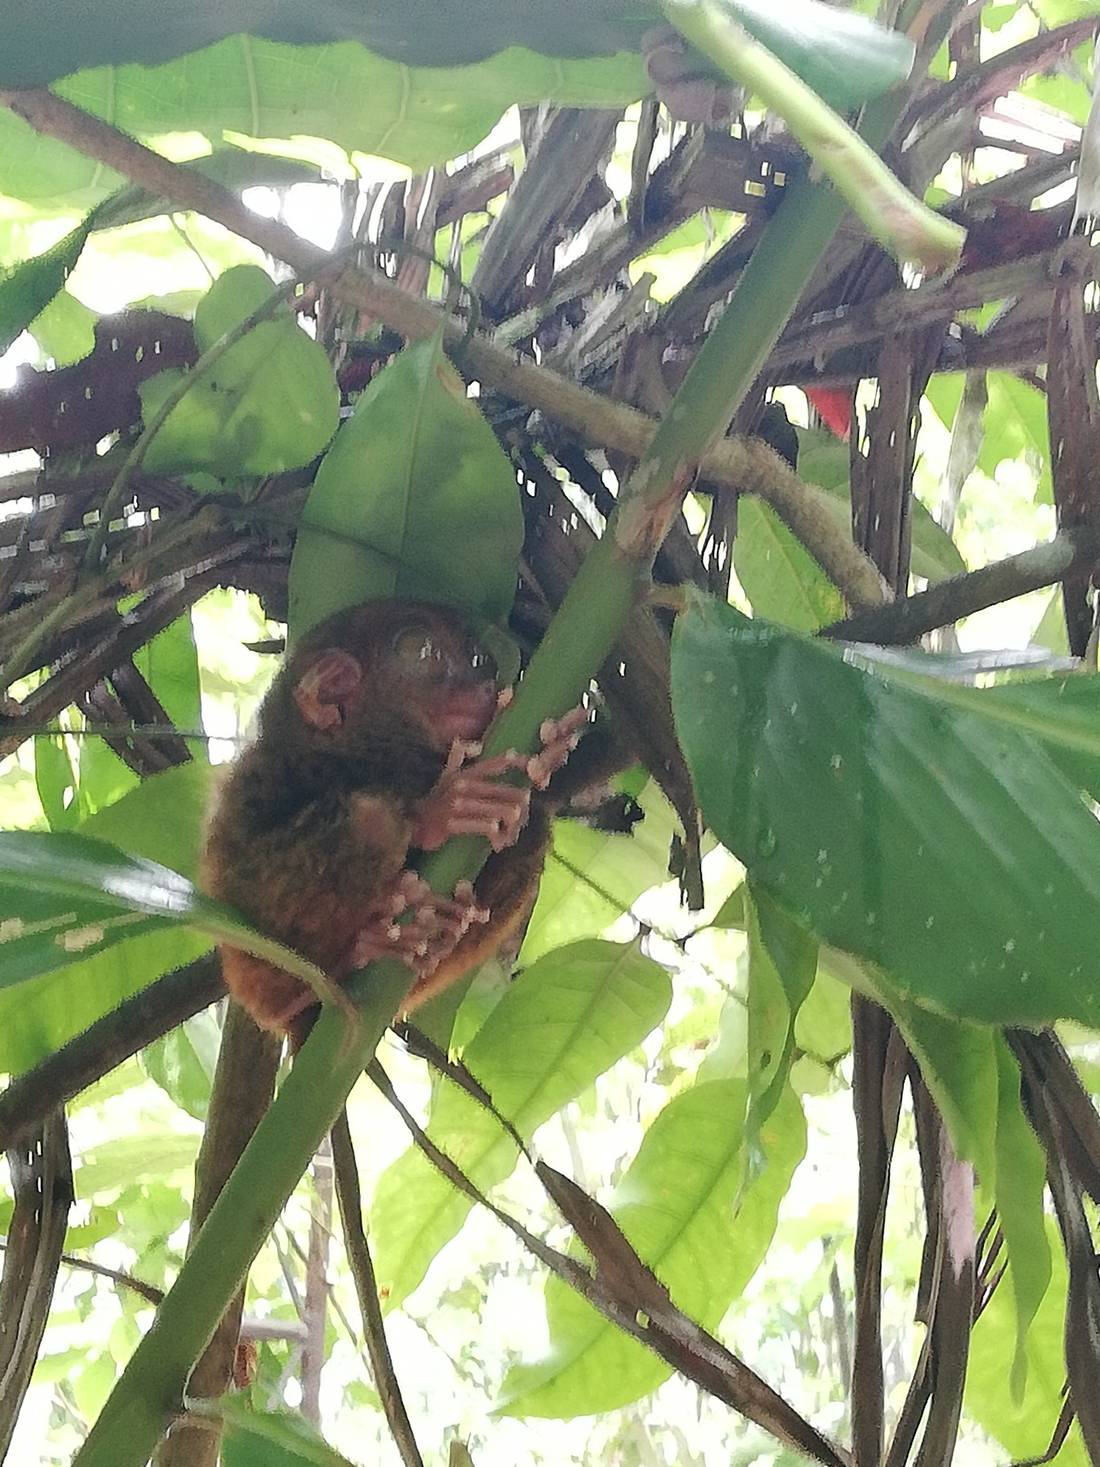 A closer look at one of the Philippines’ endangered species, the Tarsier. Only in Bohol.